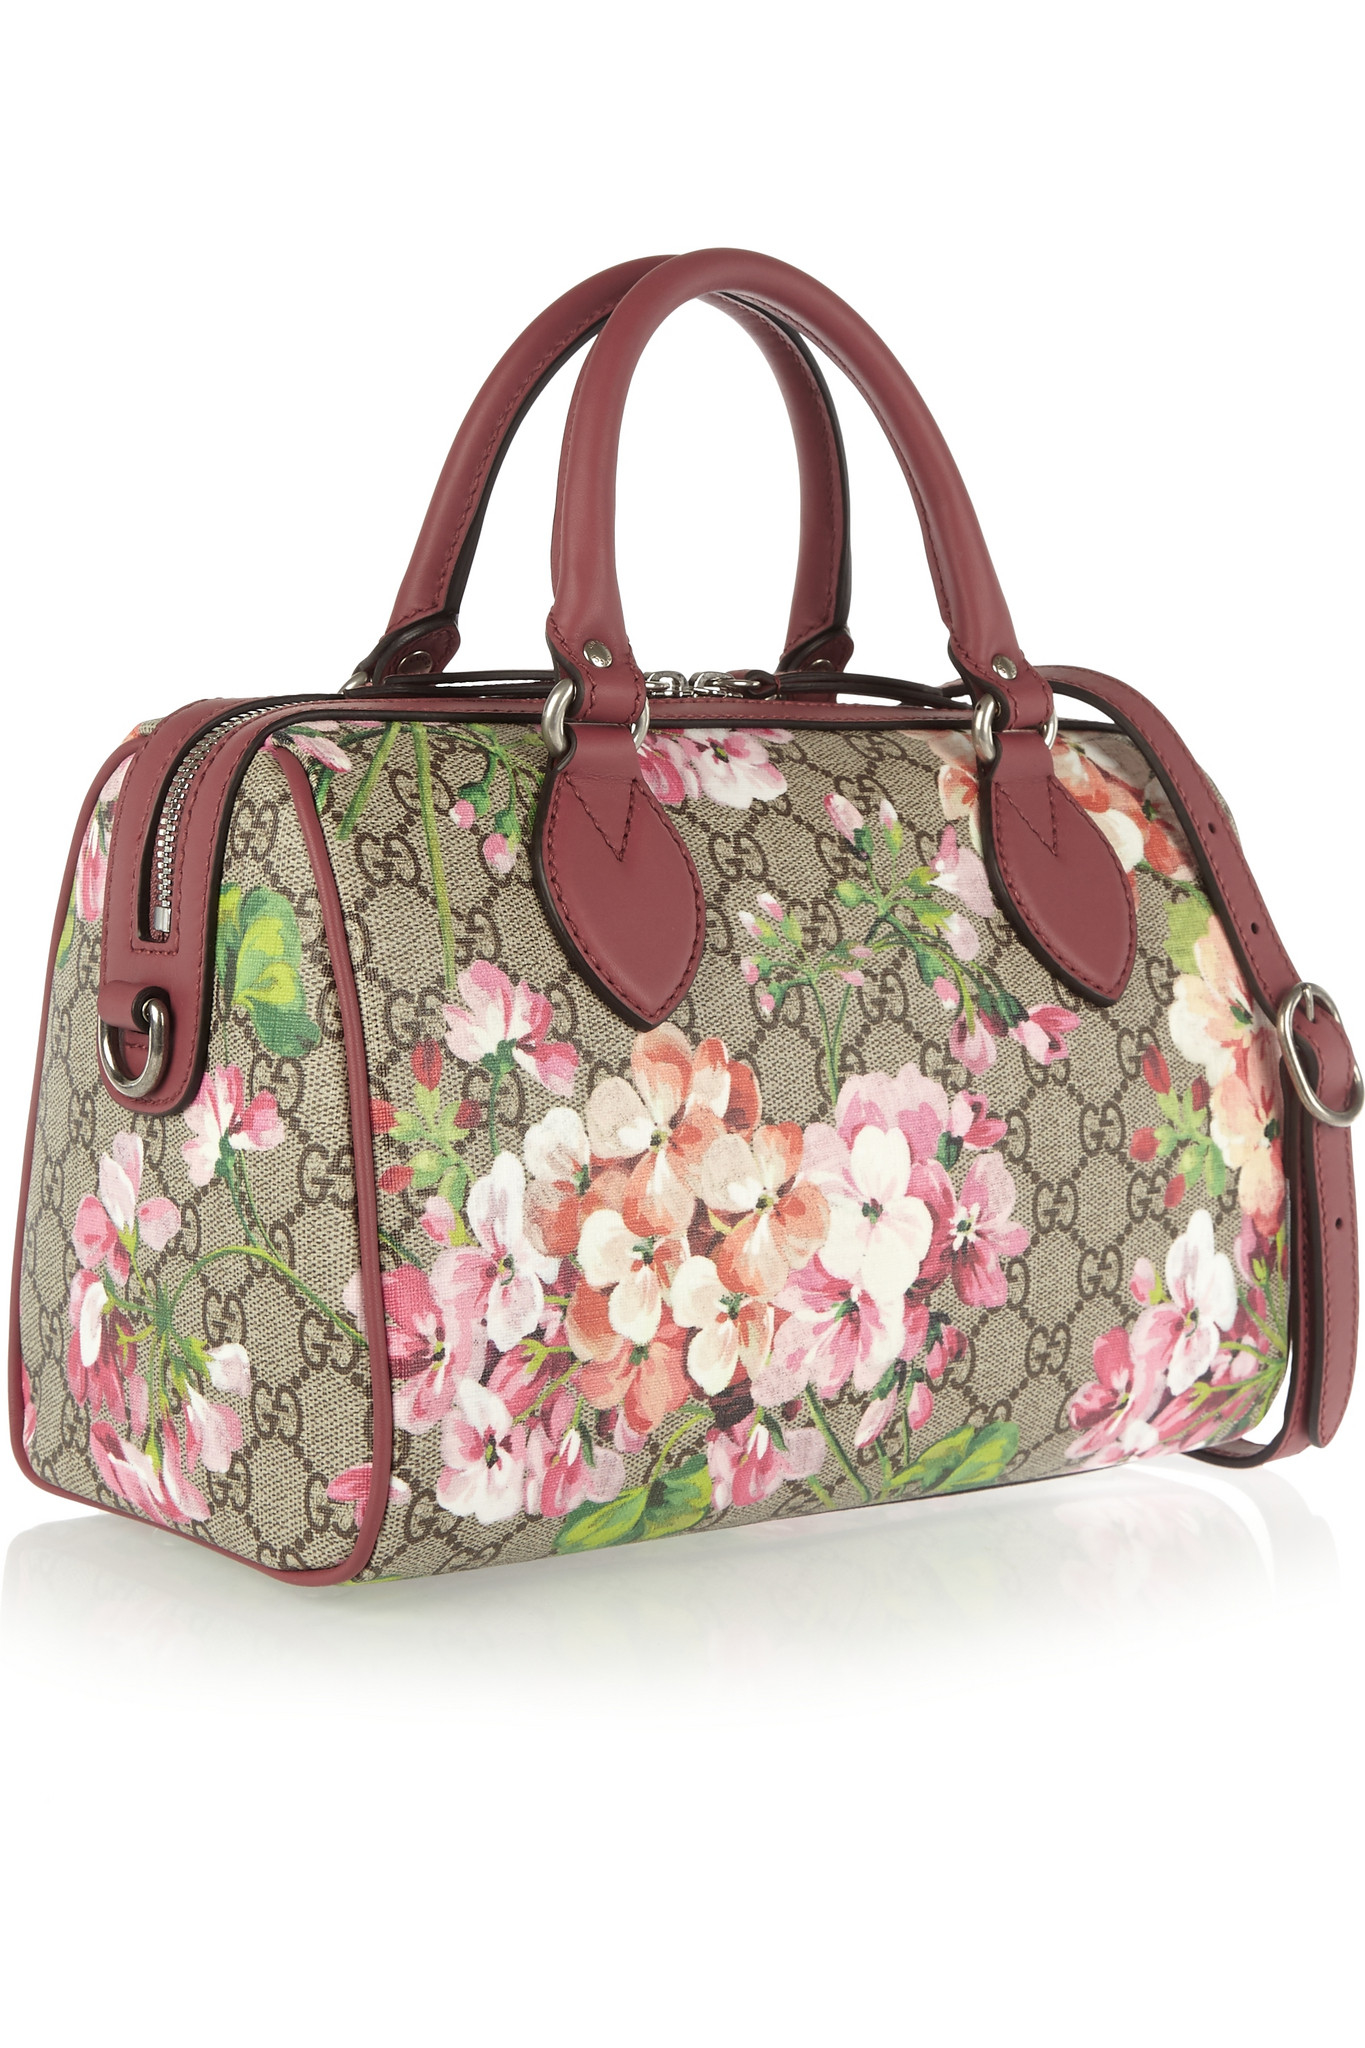 Gucci Linea A Boston Leather-trimmed Printed Coated Canvas Shoulder Bag in Beige (Natural) - Lyst